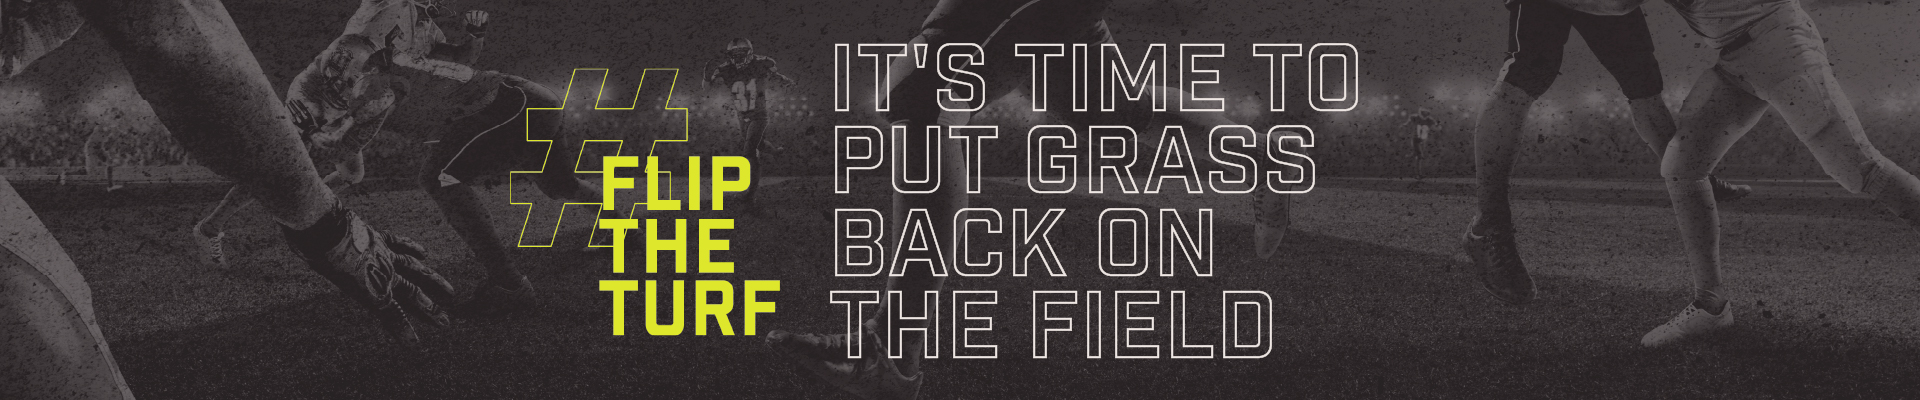 Flip The Turf: It's time to put grass back on the field